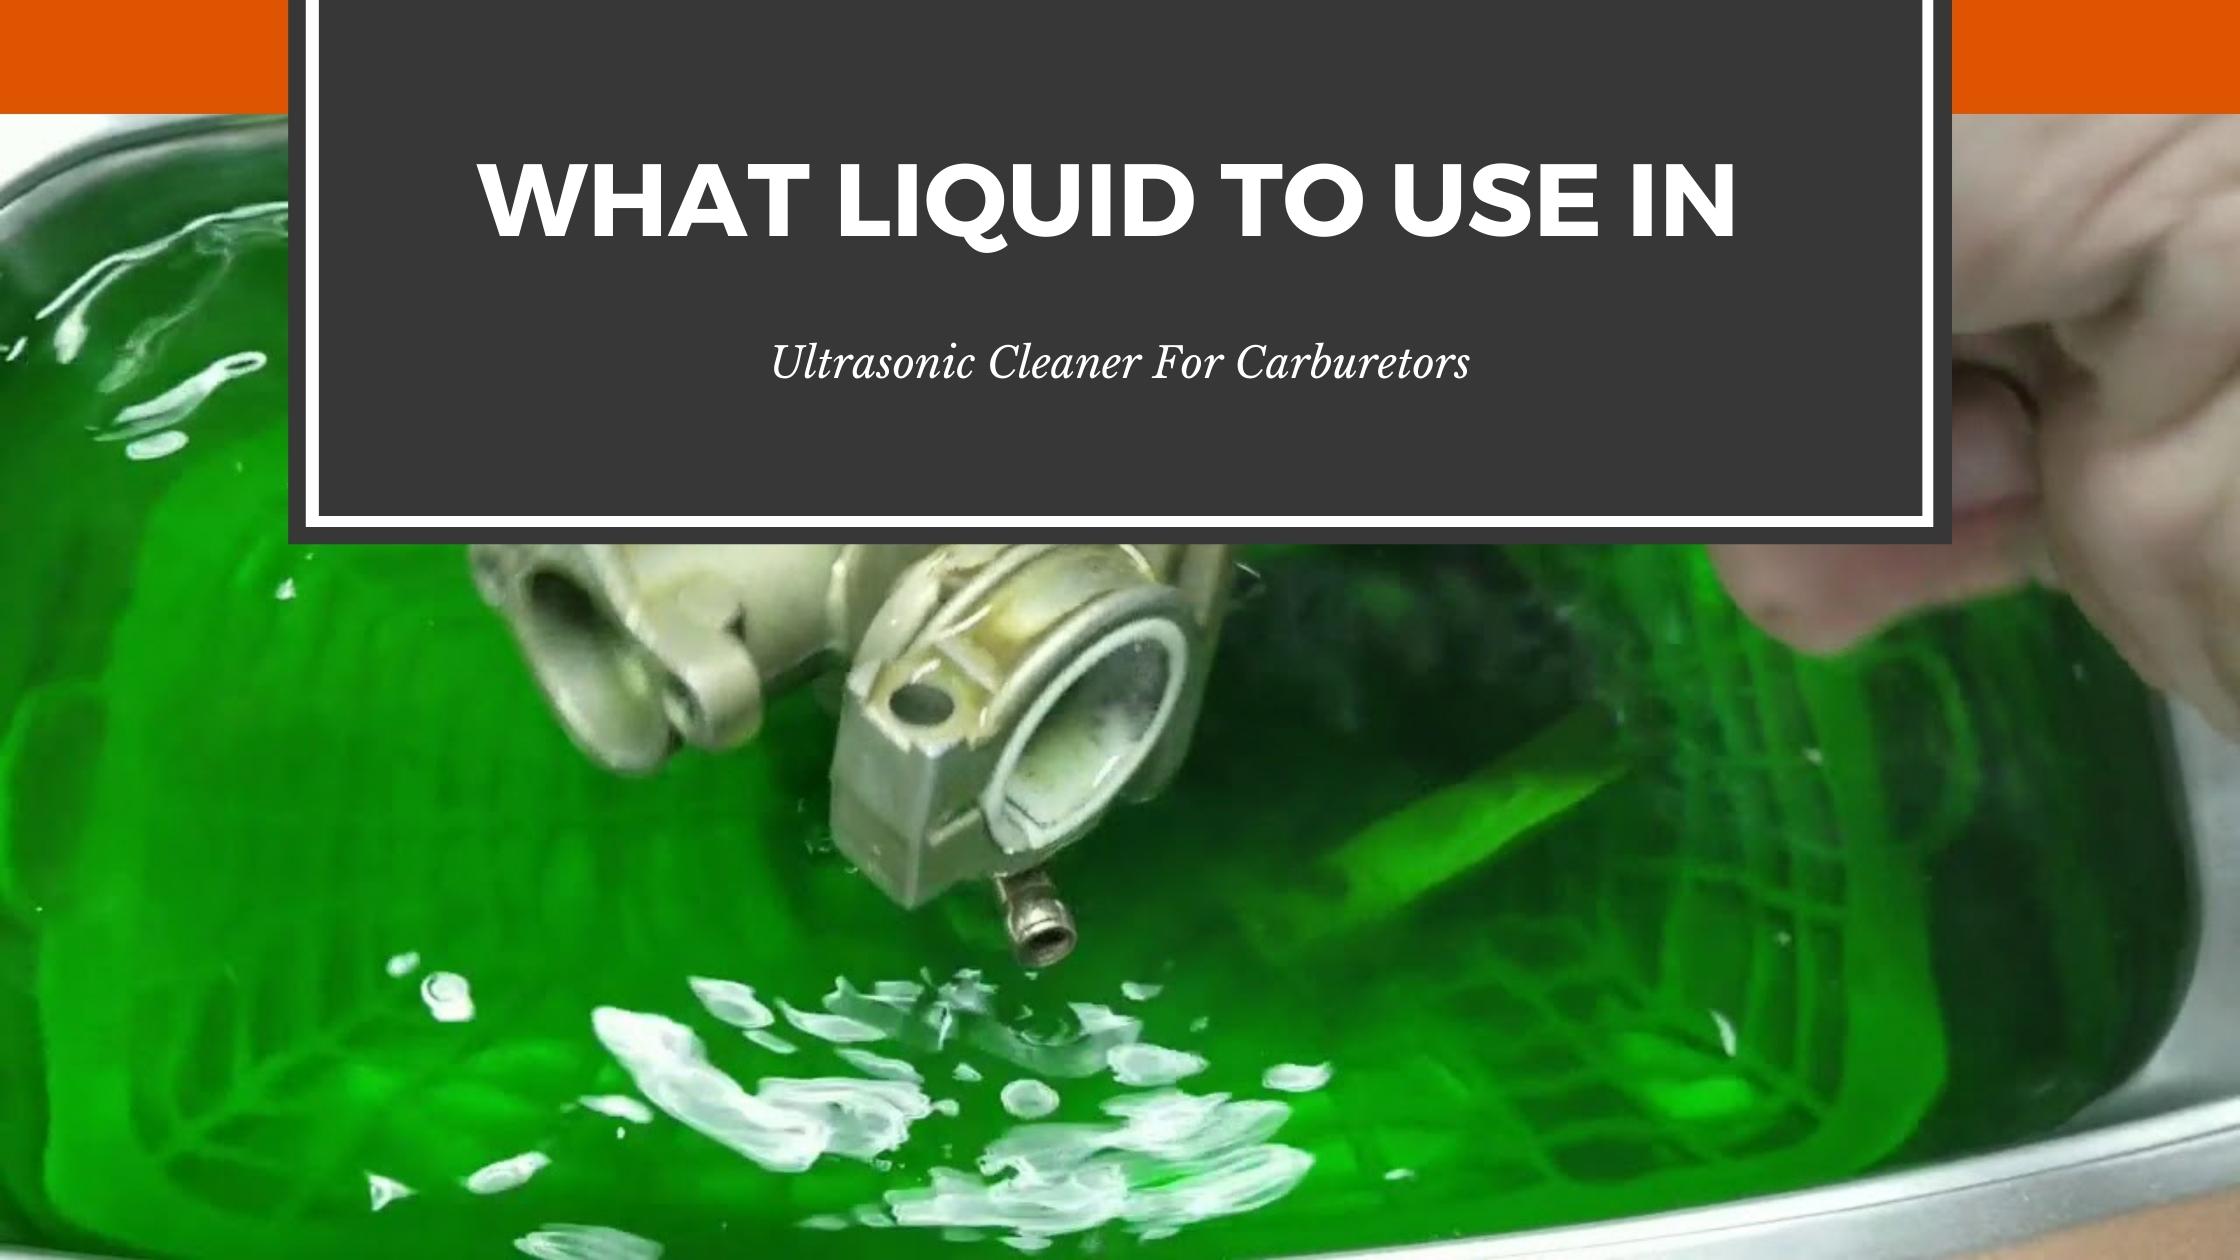 What Liquid To Use In Ultrasonic Cleaner For Carburetors